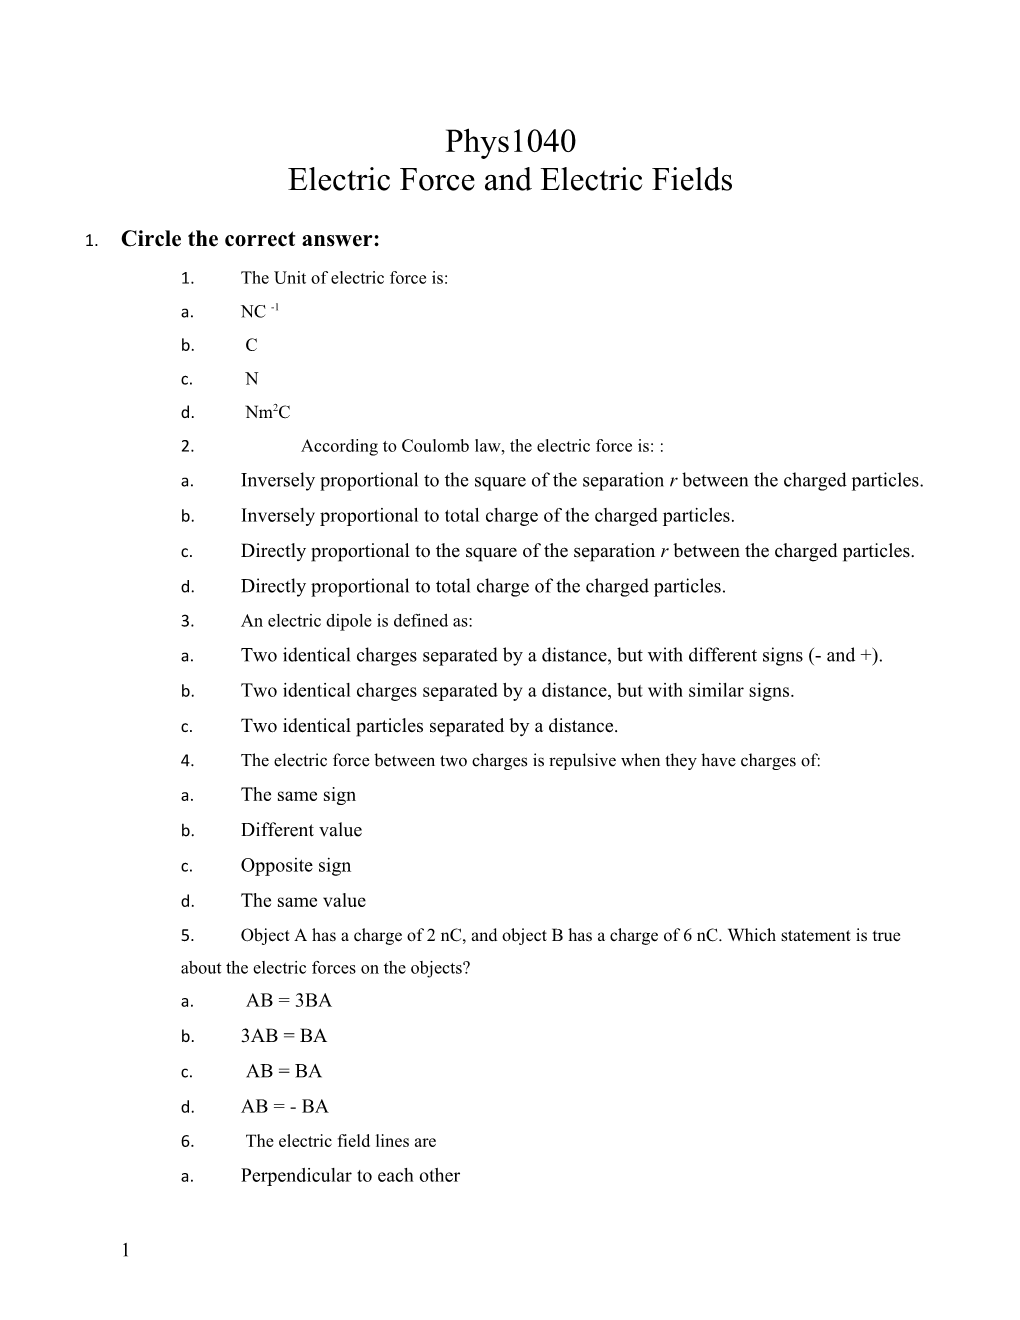 Electric Force and Electric Fields